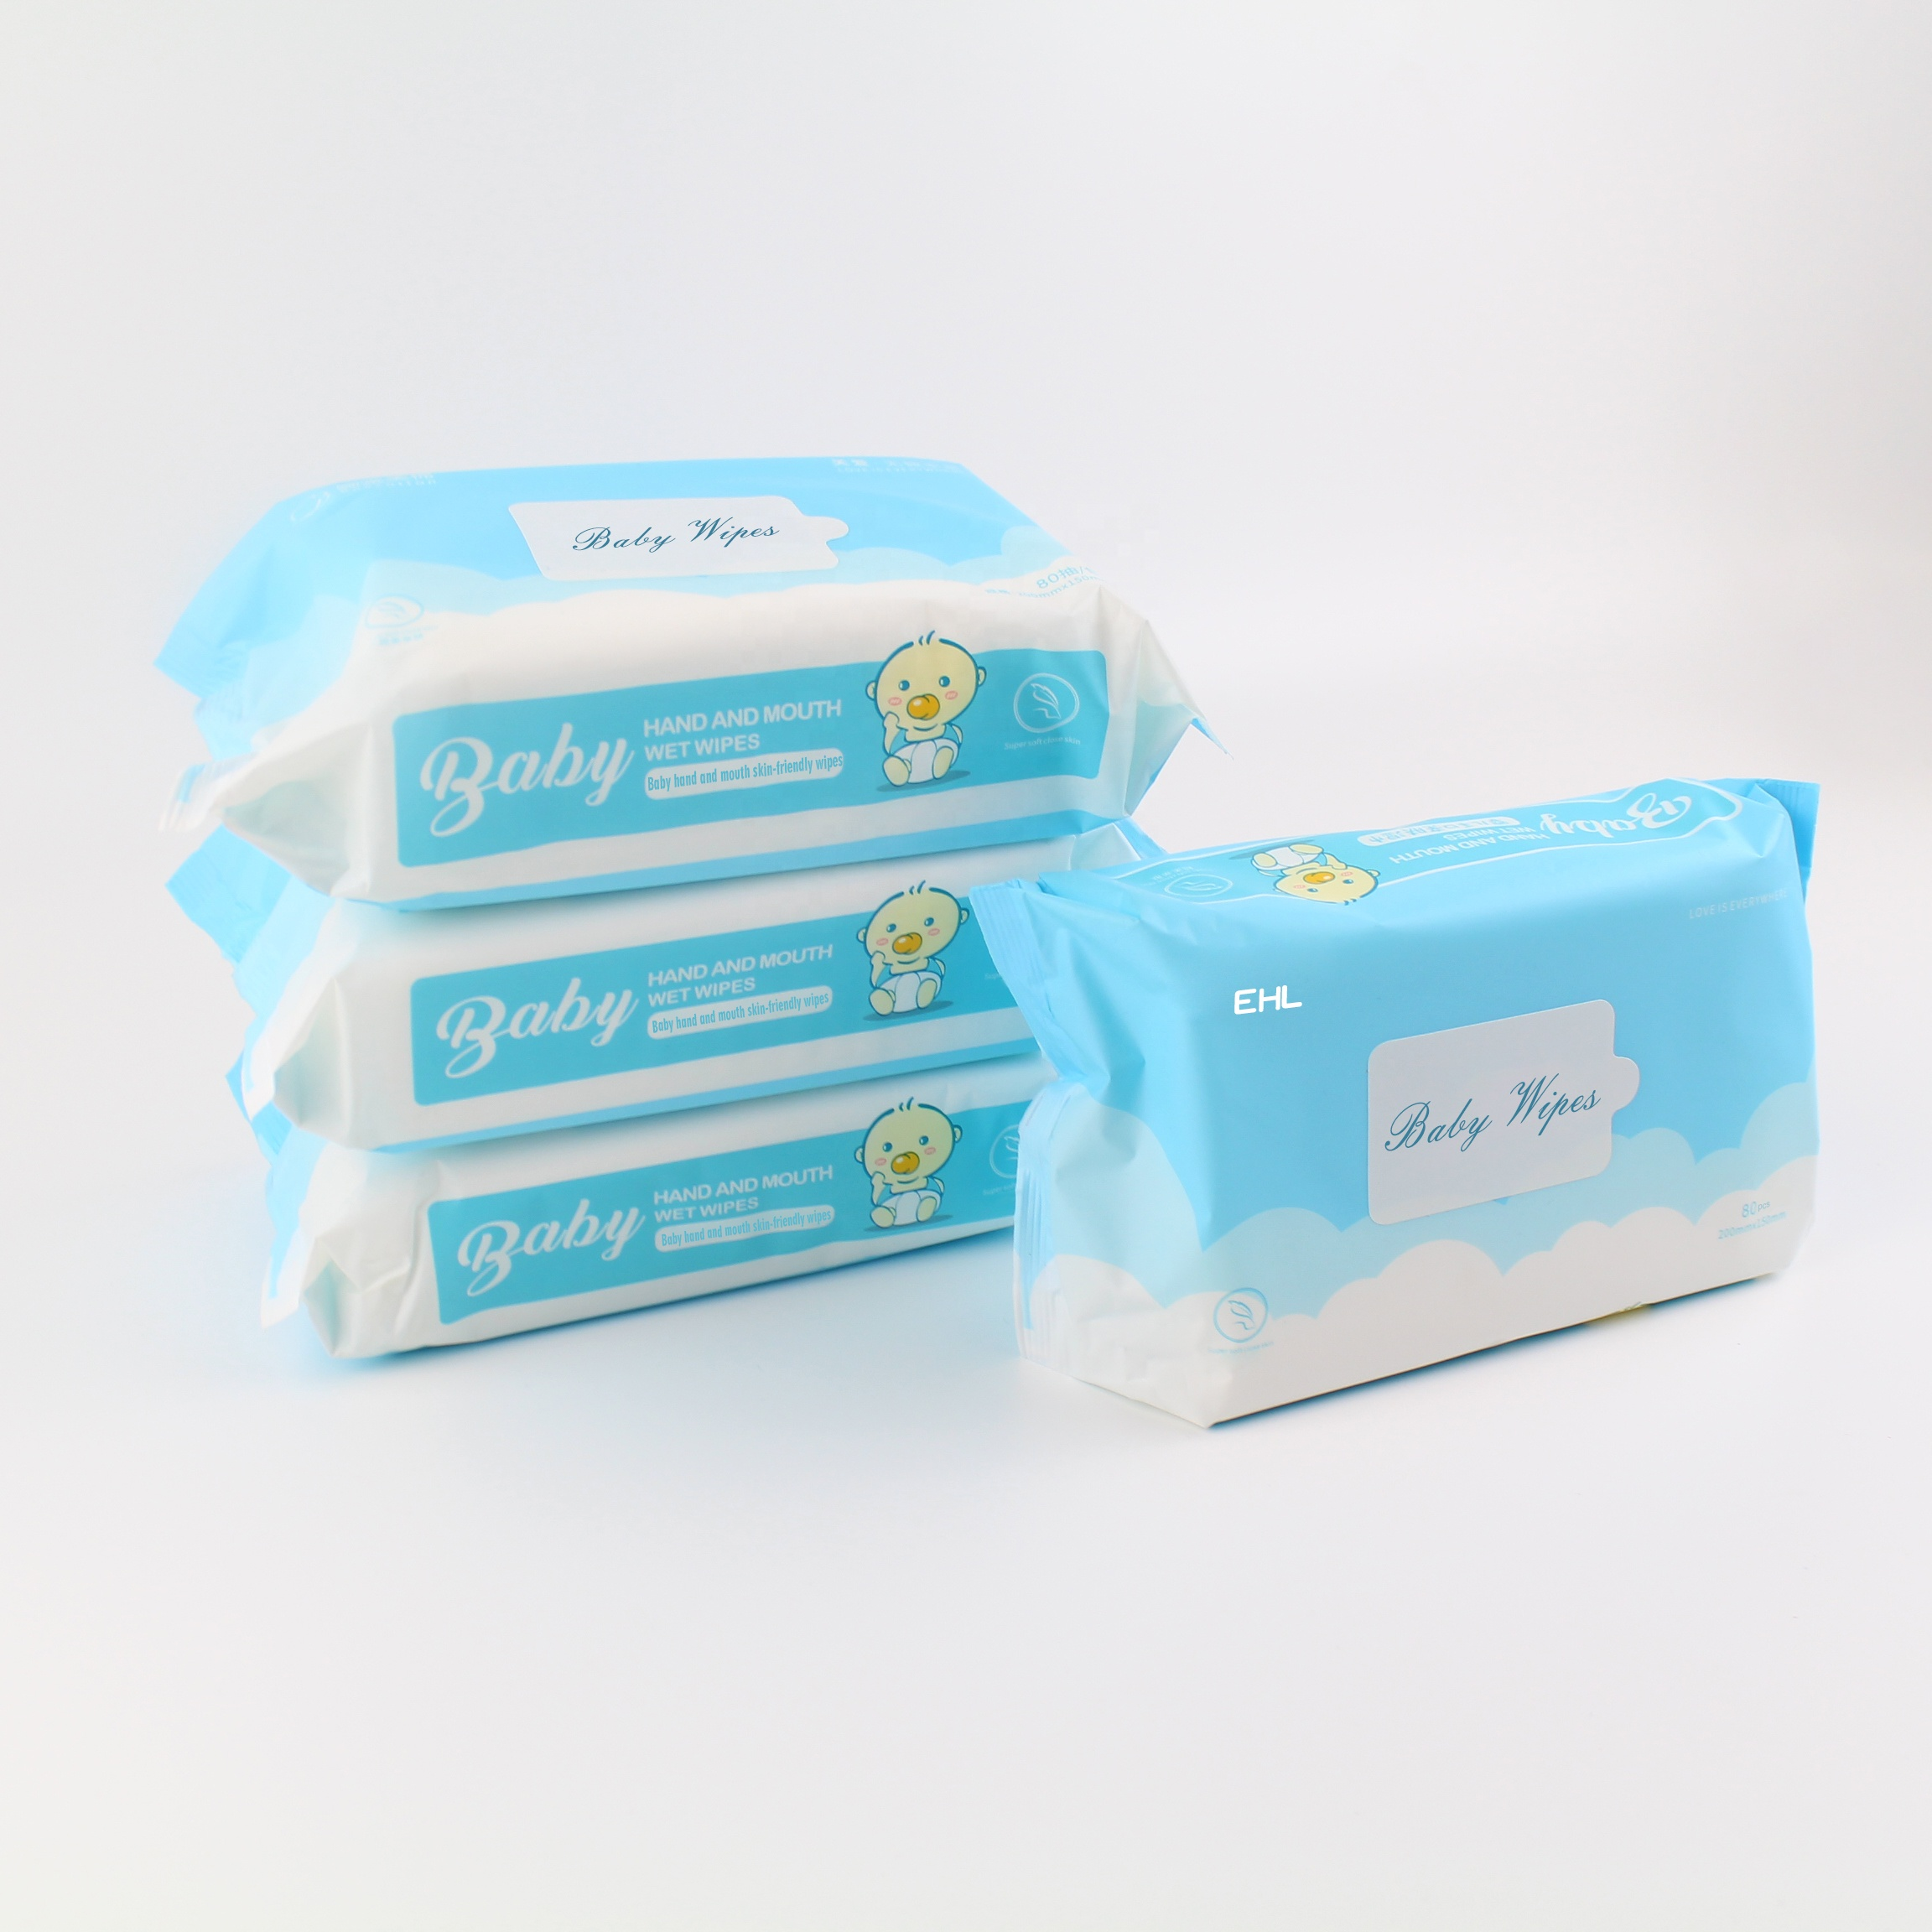 Baby Wet Wipes Manufacturer Add Aloe Water Wipes For Sensitive Skin